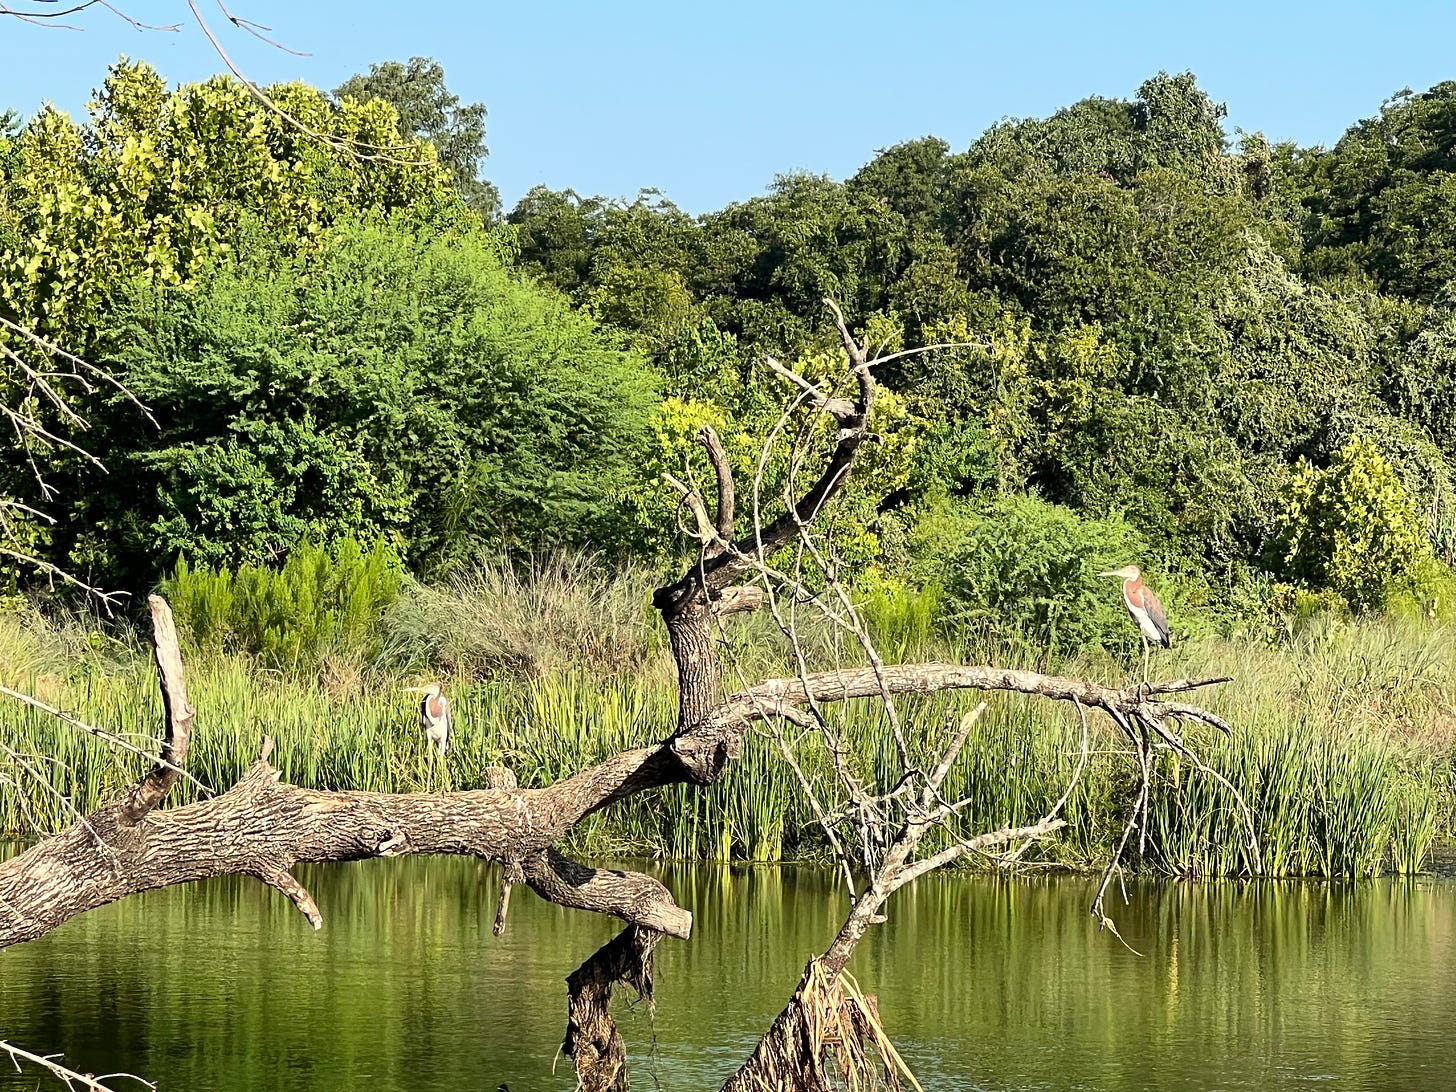 Two juvenile great blue herons on a branch